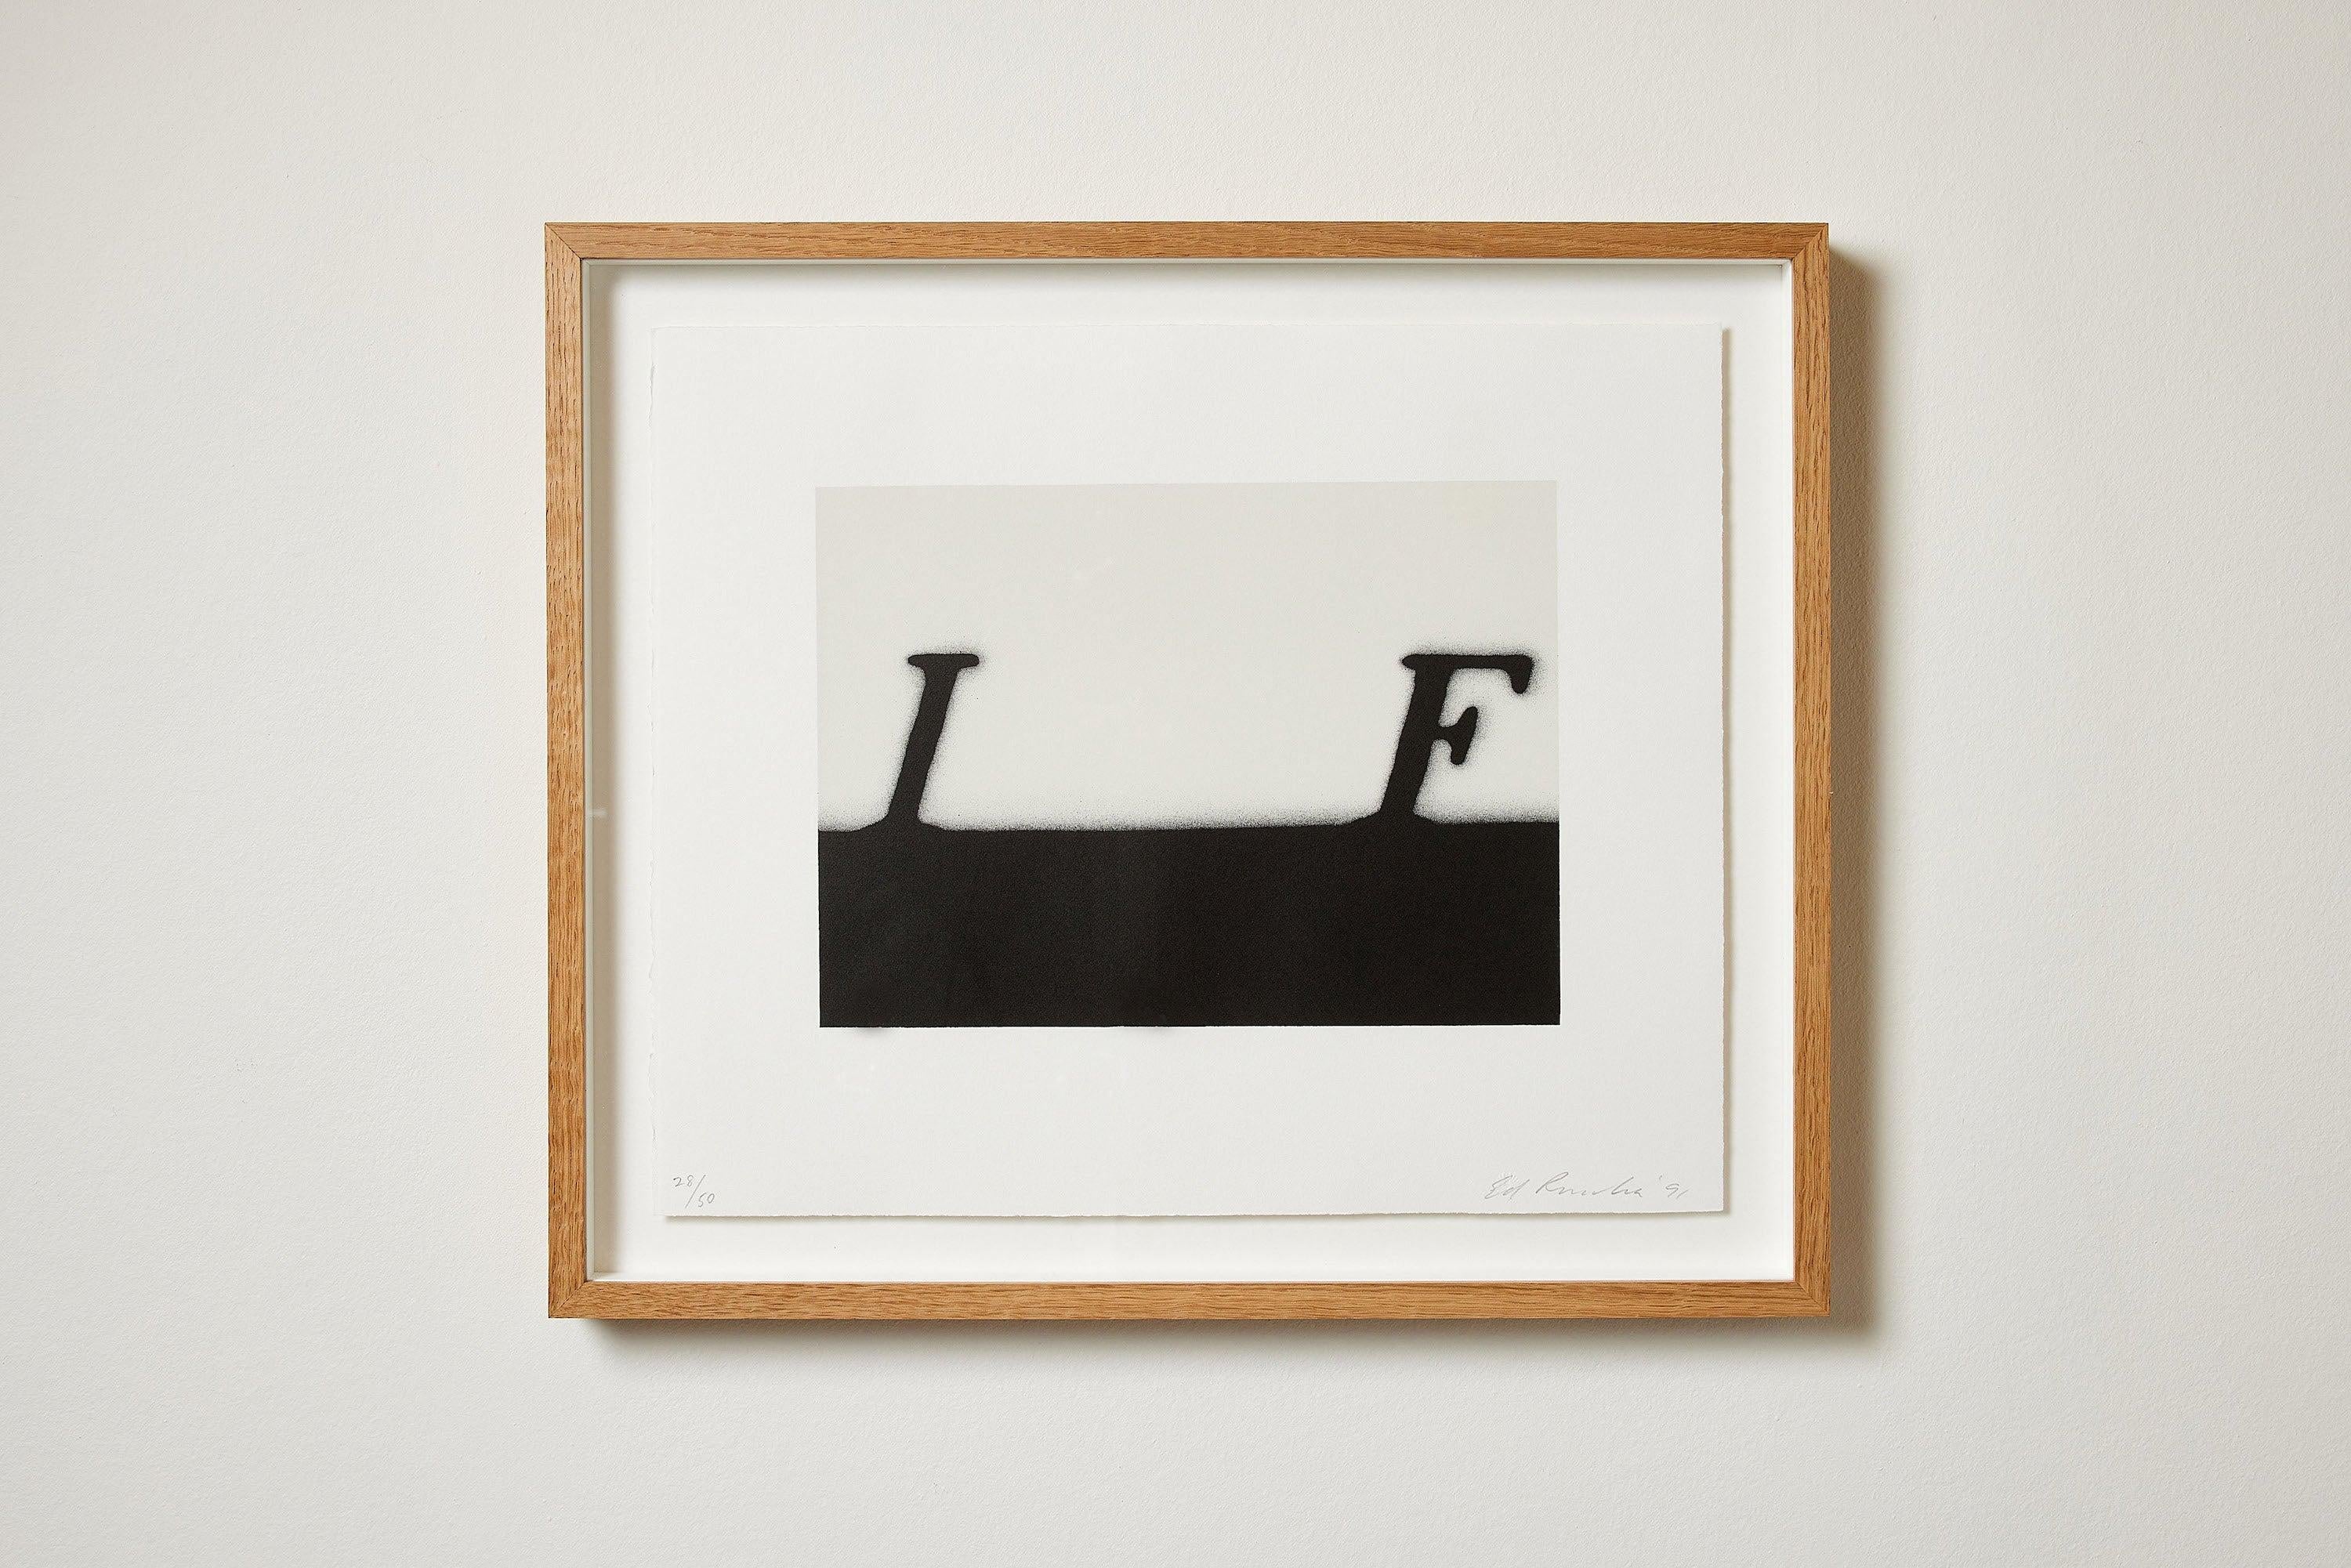 ED RUSCHA
If, 1991
Lithograph in colours, on white Rives BFK paper
Signed, dated and numbered from the edition of 50
Printed by Hamilton Press, Venice, California
Published by Creative Works Editions, Osaka, Japan
Sheet: 38.4 x 45.7 cm (15.1 x 18.0